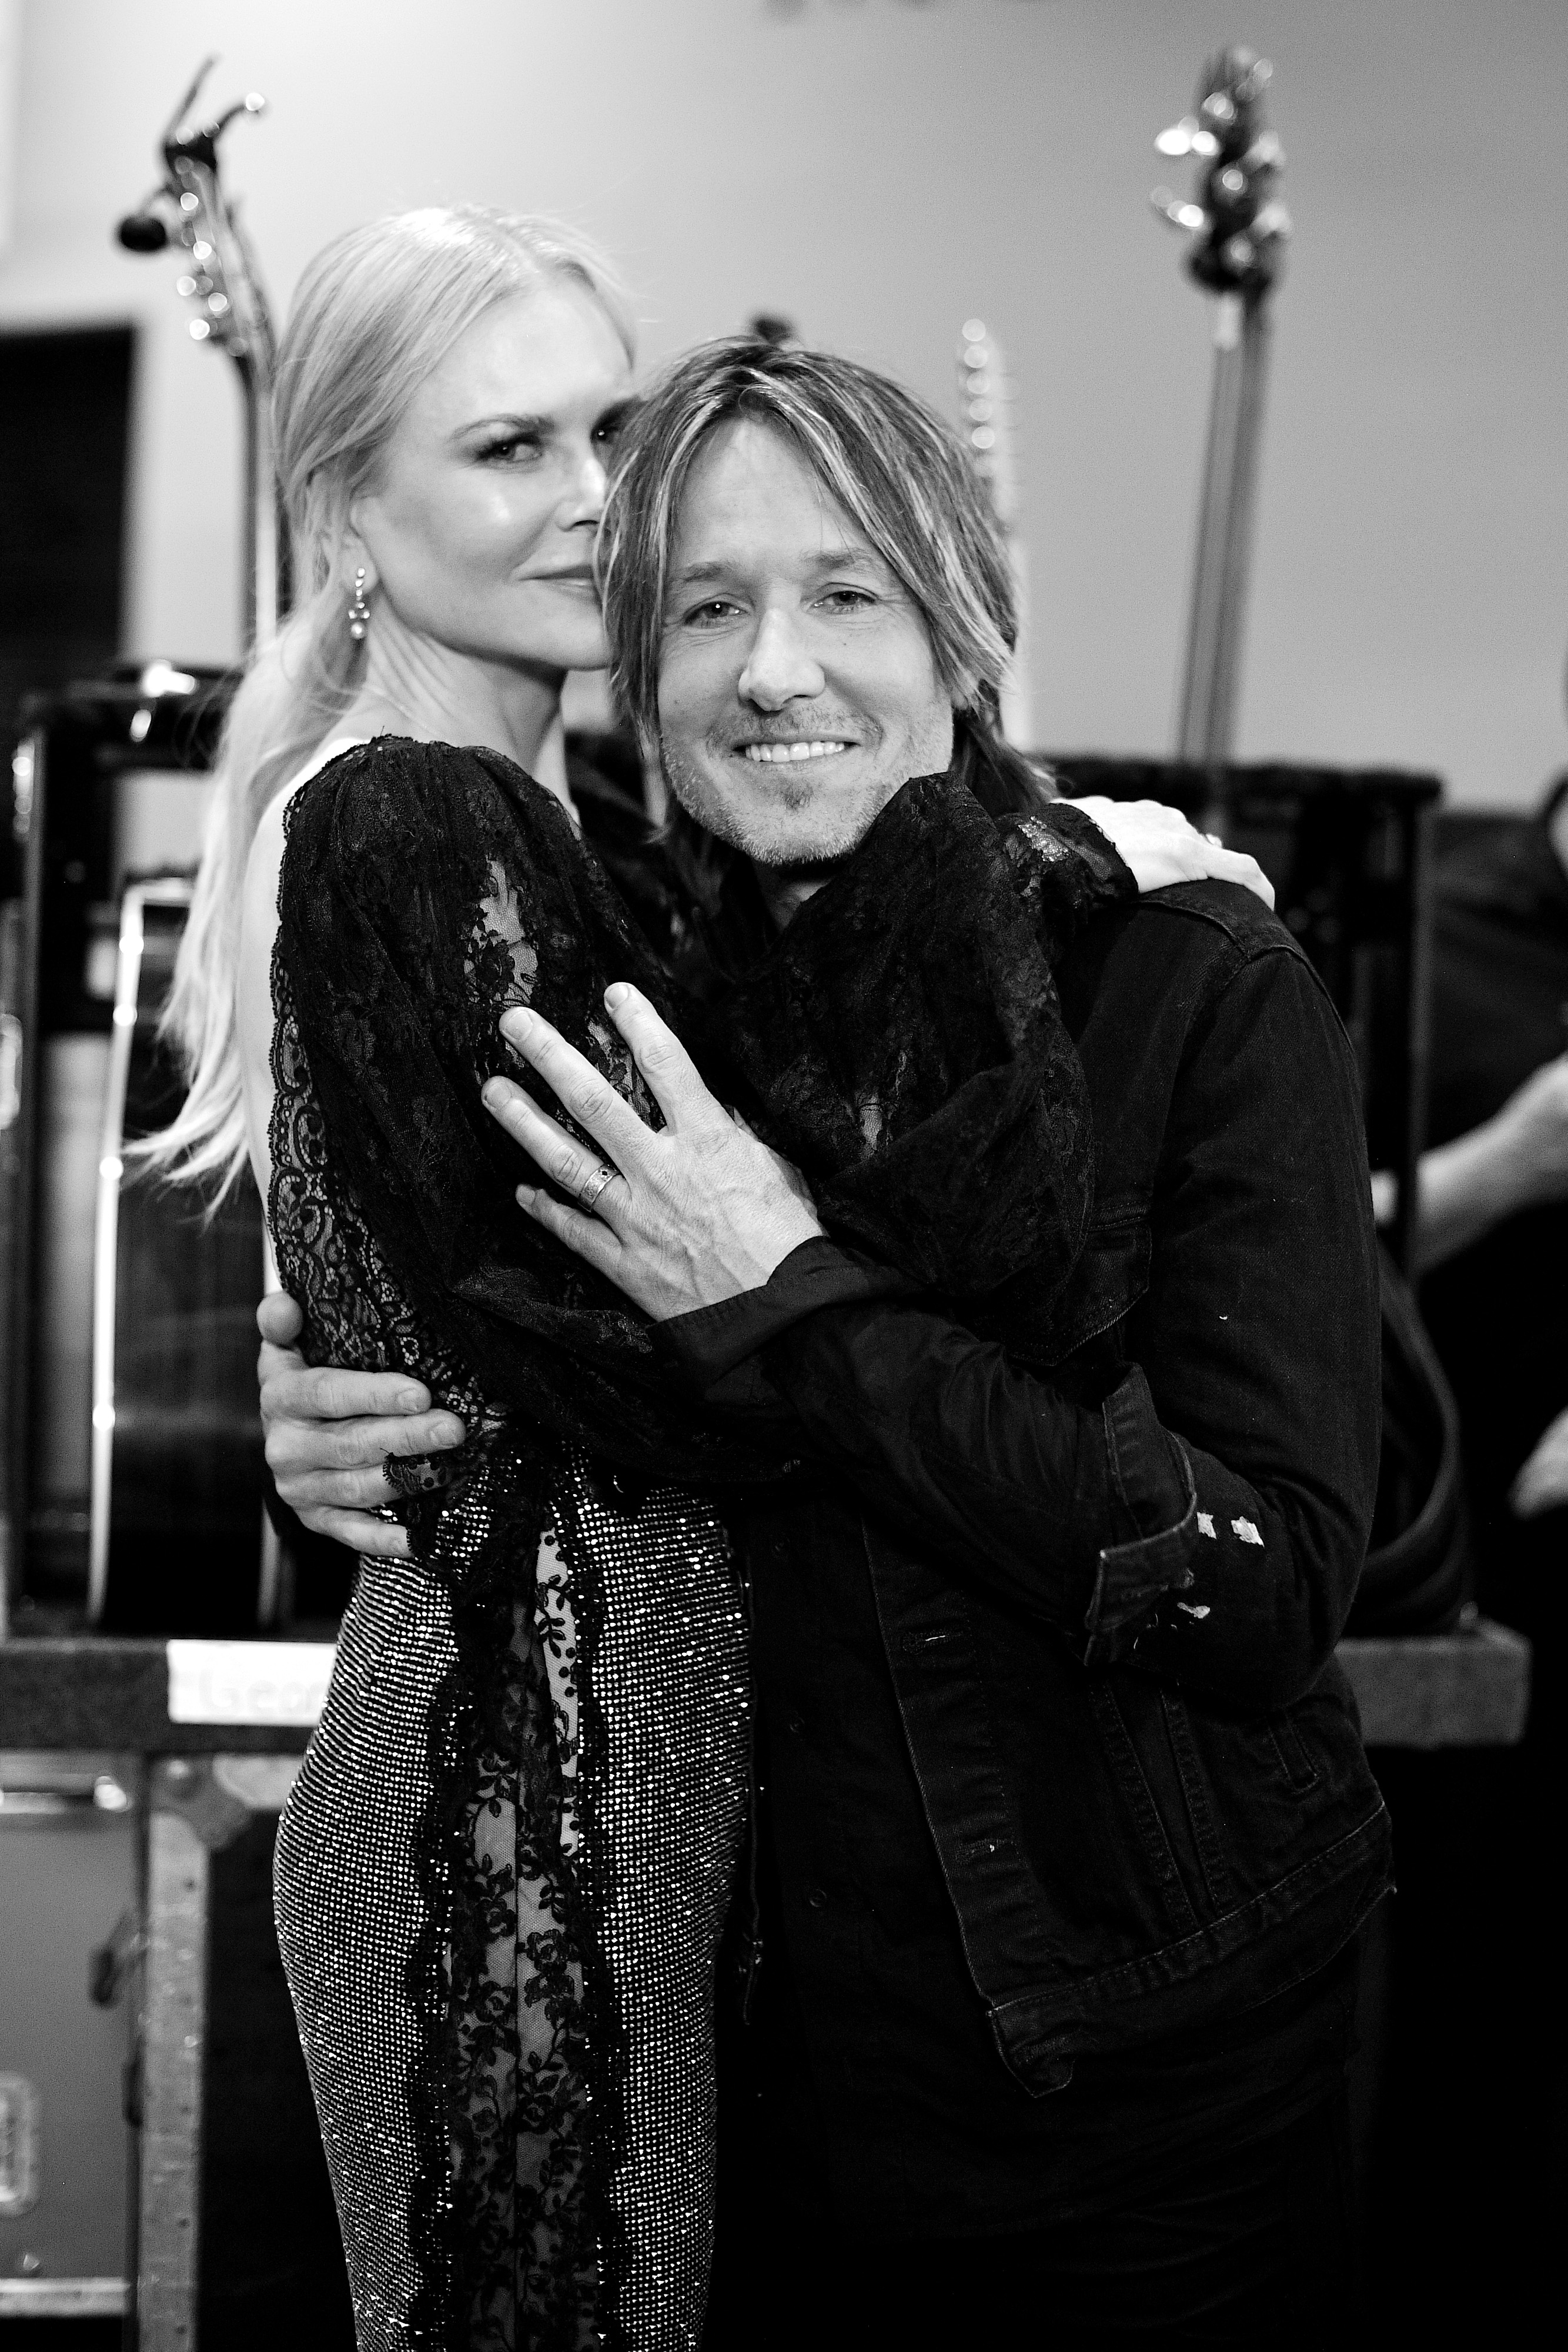 Nicole Kidman and Keith Urban backstage at the 54th Academy Of Country Music Awards in Las Vegas, Nevada on April 7, 2019 | Source: Getty Images